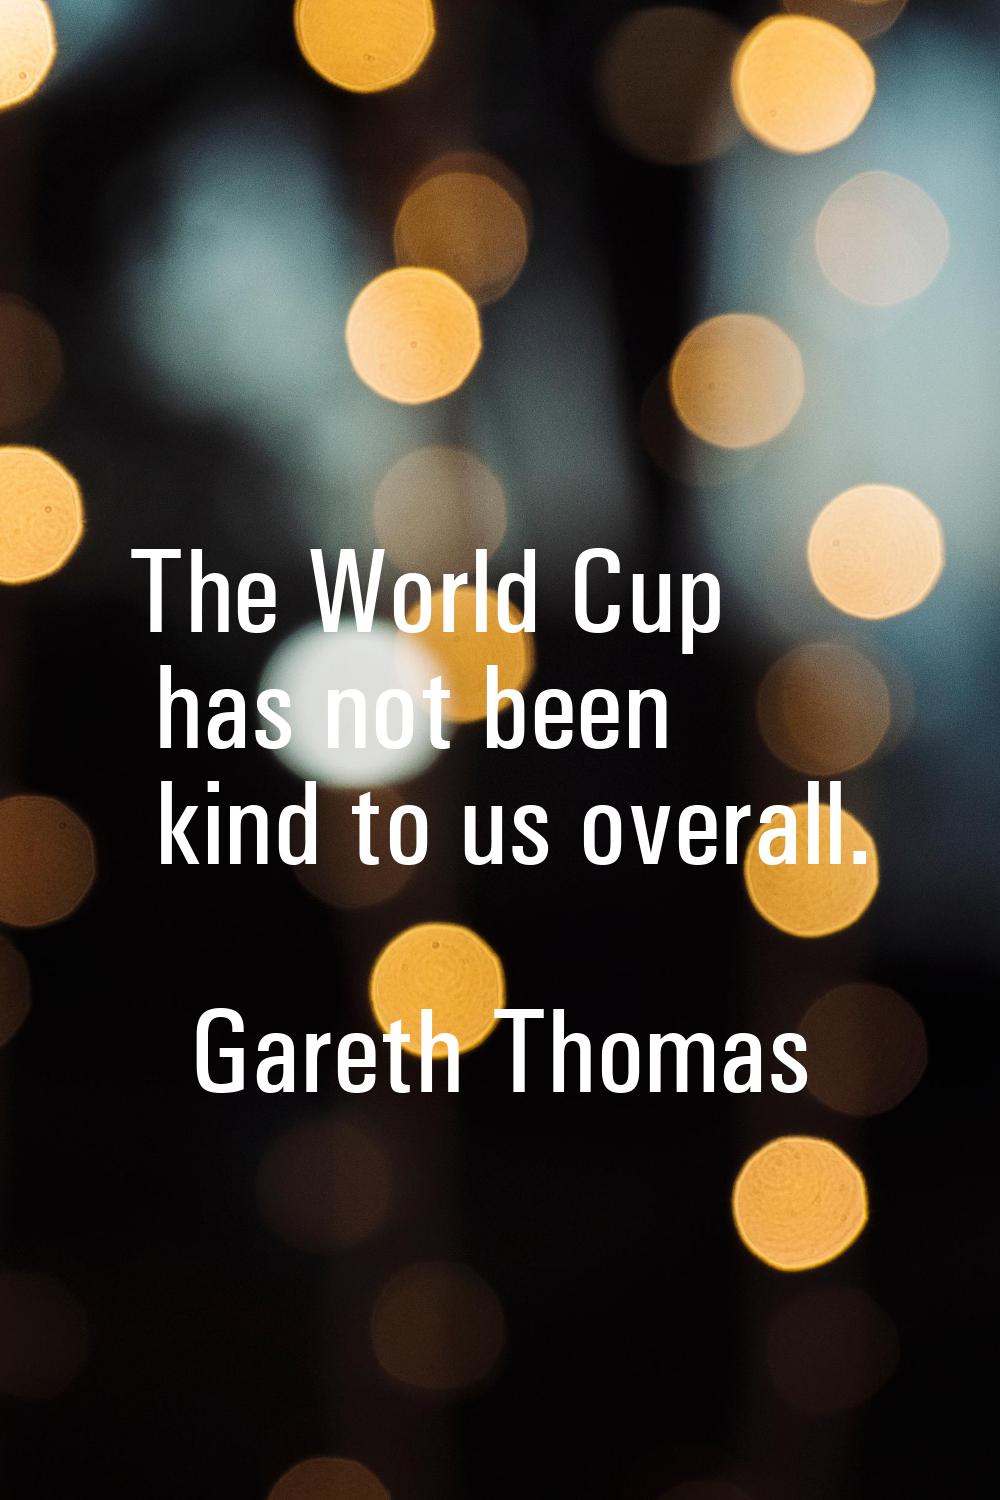 The World Cup has not been kind to us overall.